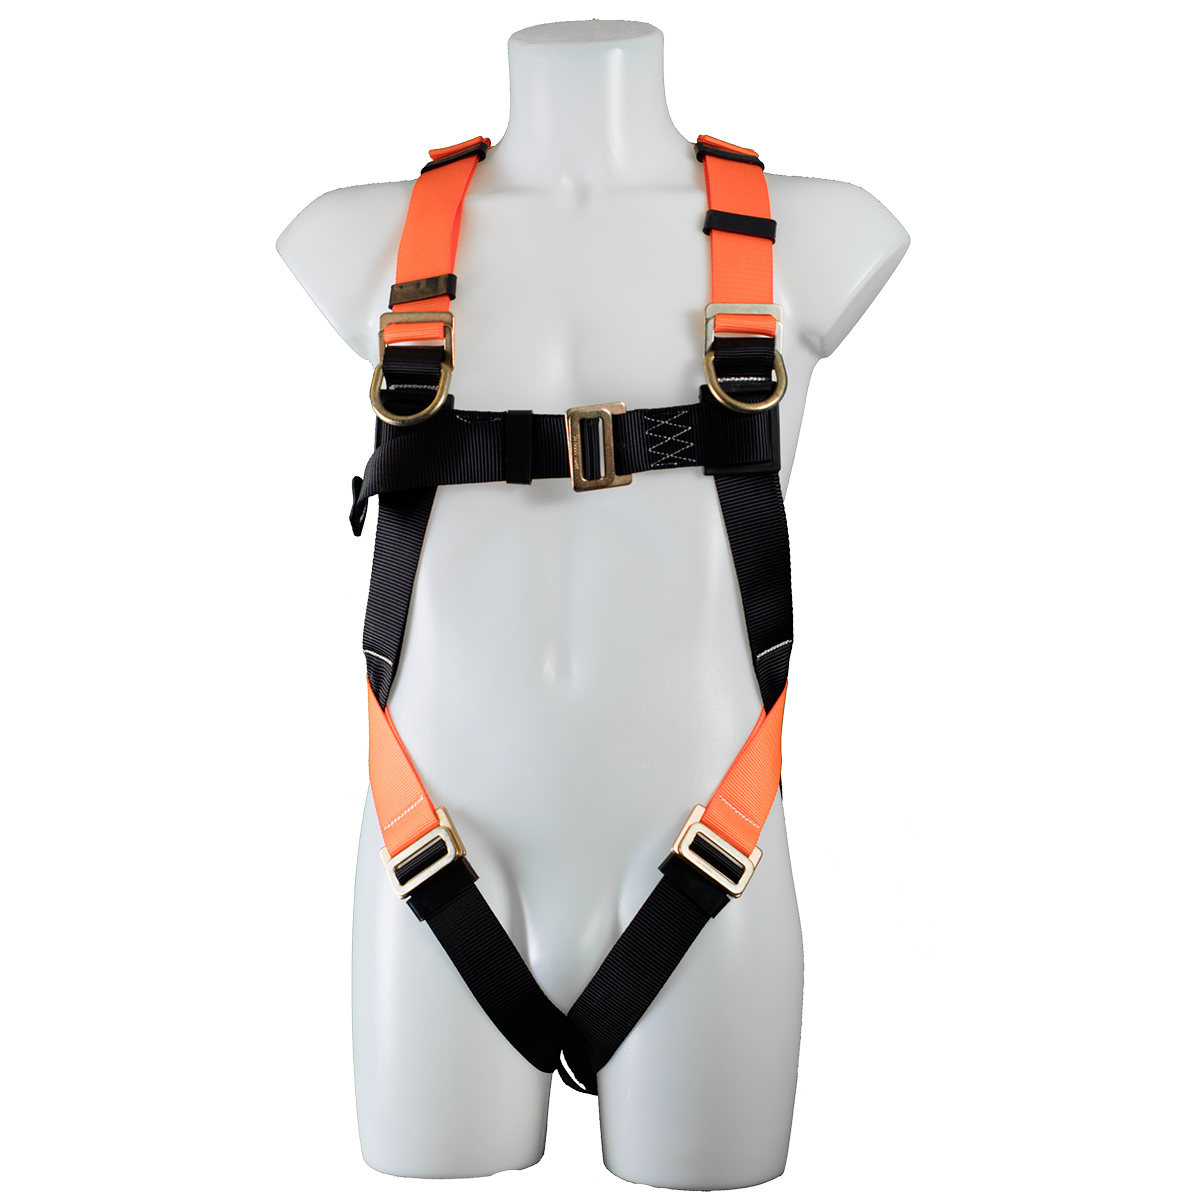 3 point harness